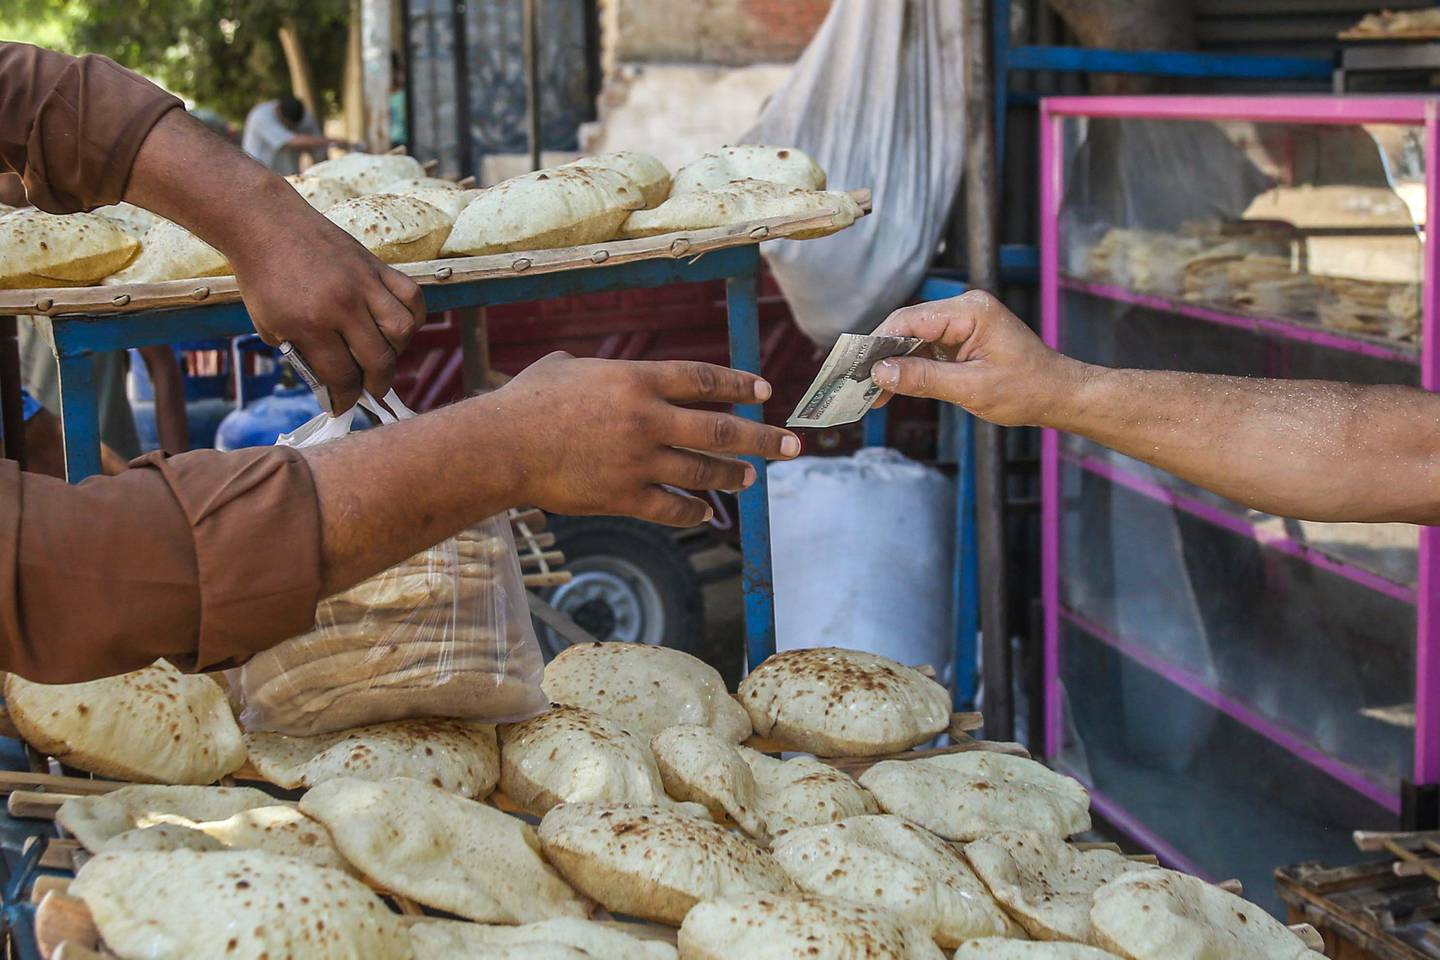 A customer buying bread in Egypt. Bloomberg